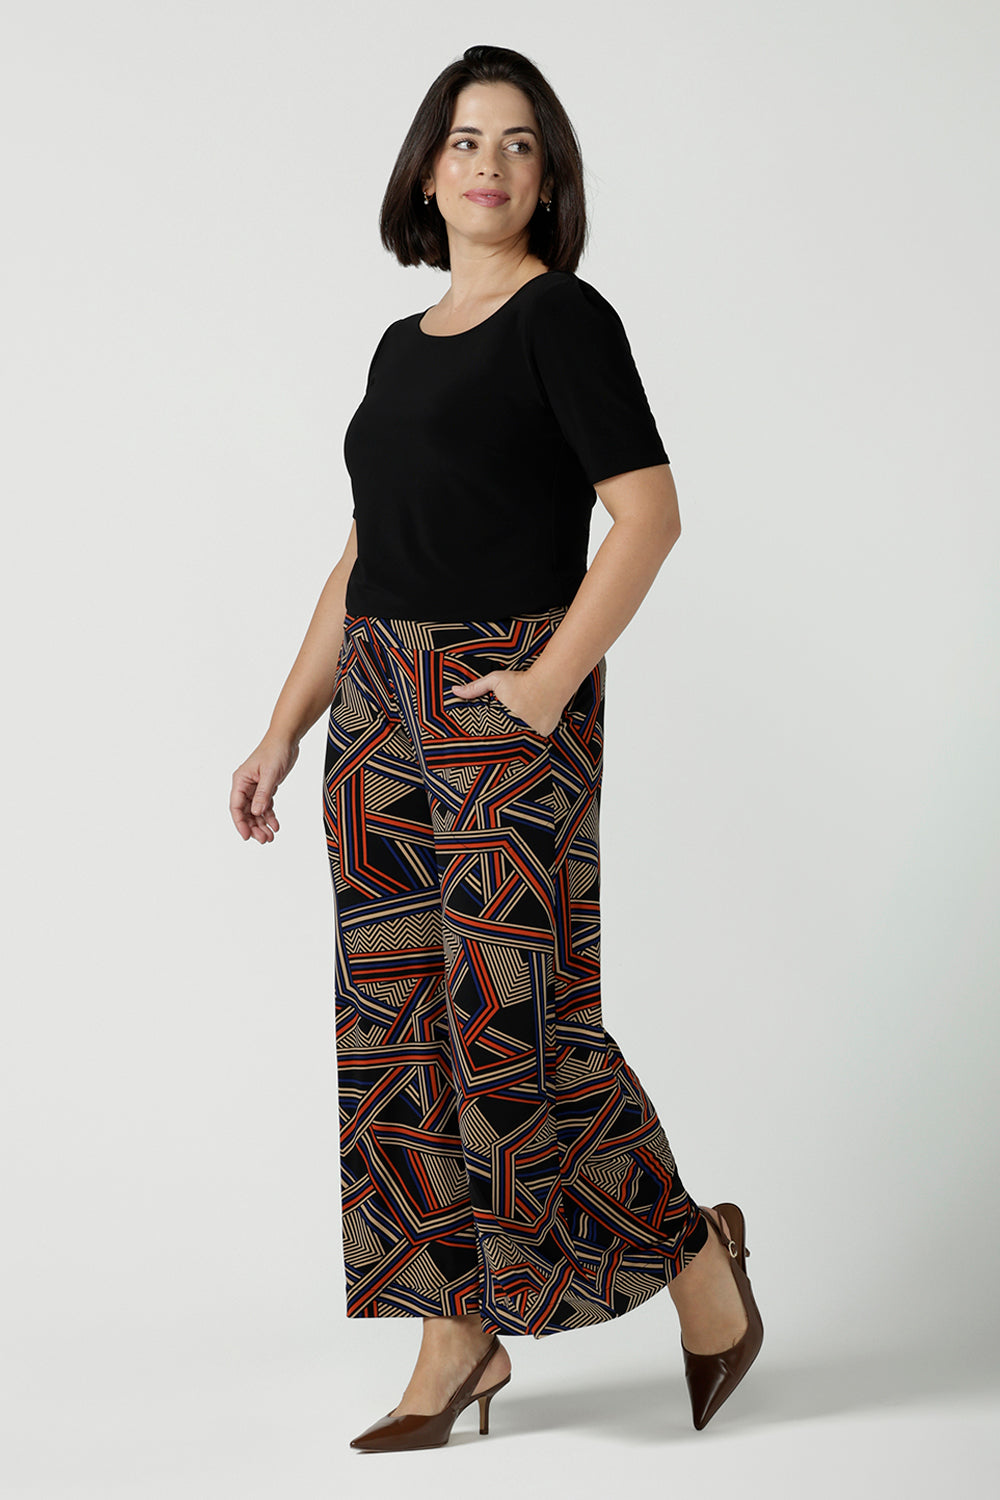 A size 10 woman wears the Dany Culotte in Trixie, a printed Jersey work pant with a geometric pattern. Wide leg with functional pockets and wide waistband. Cropped length and petite height friendly. Made in Australia for women size 8 - 24.